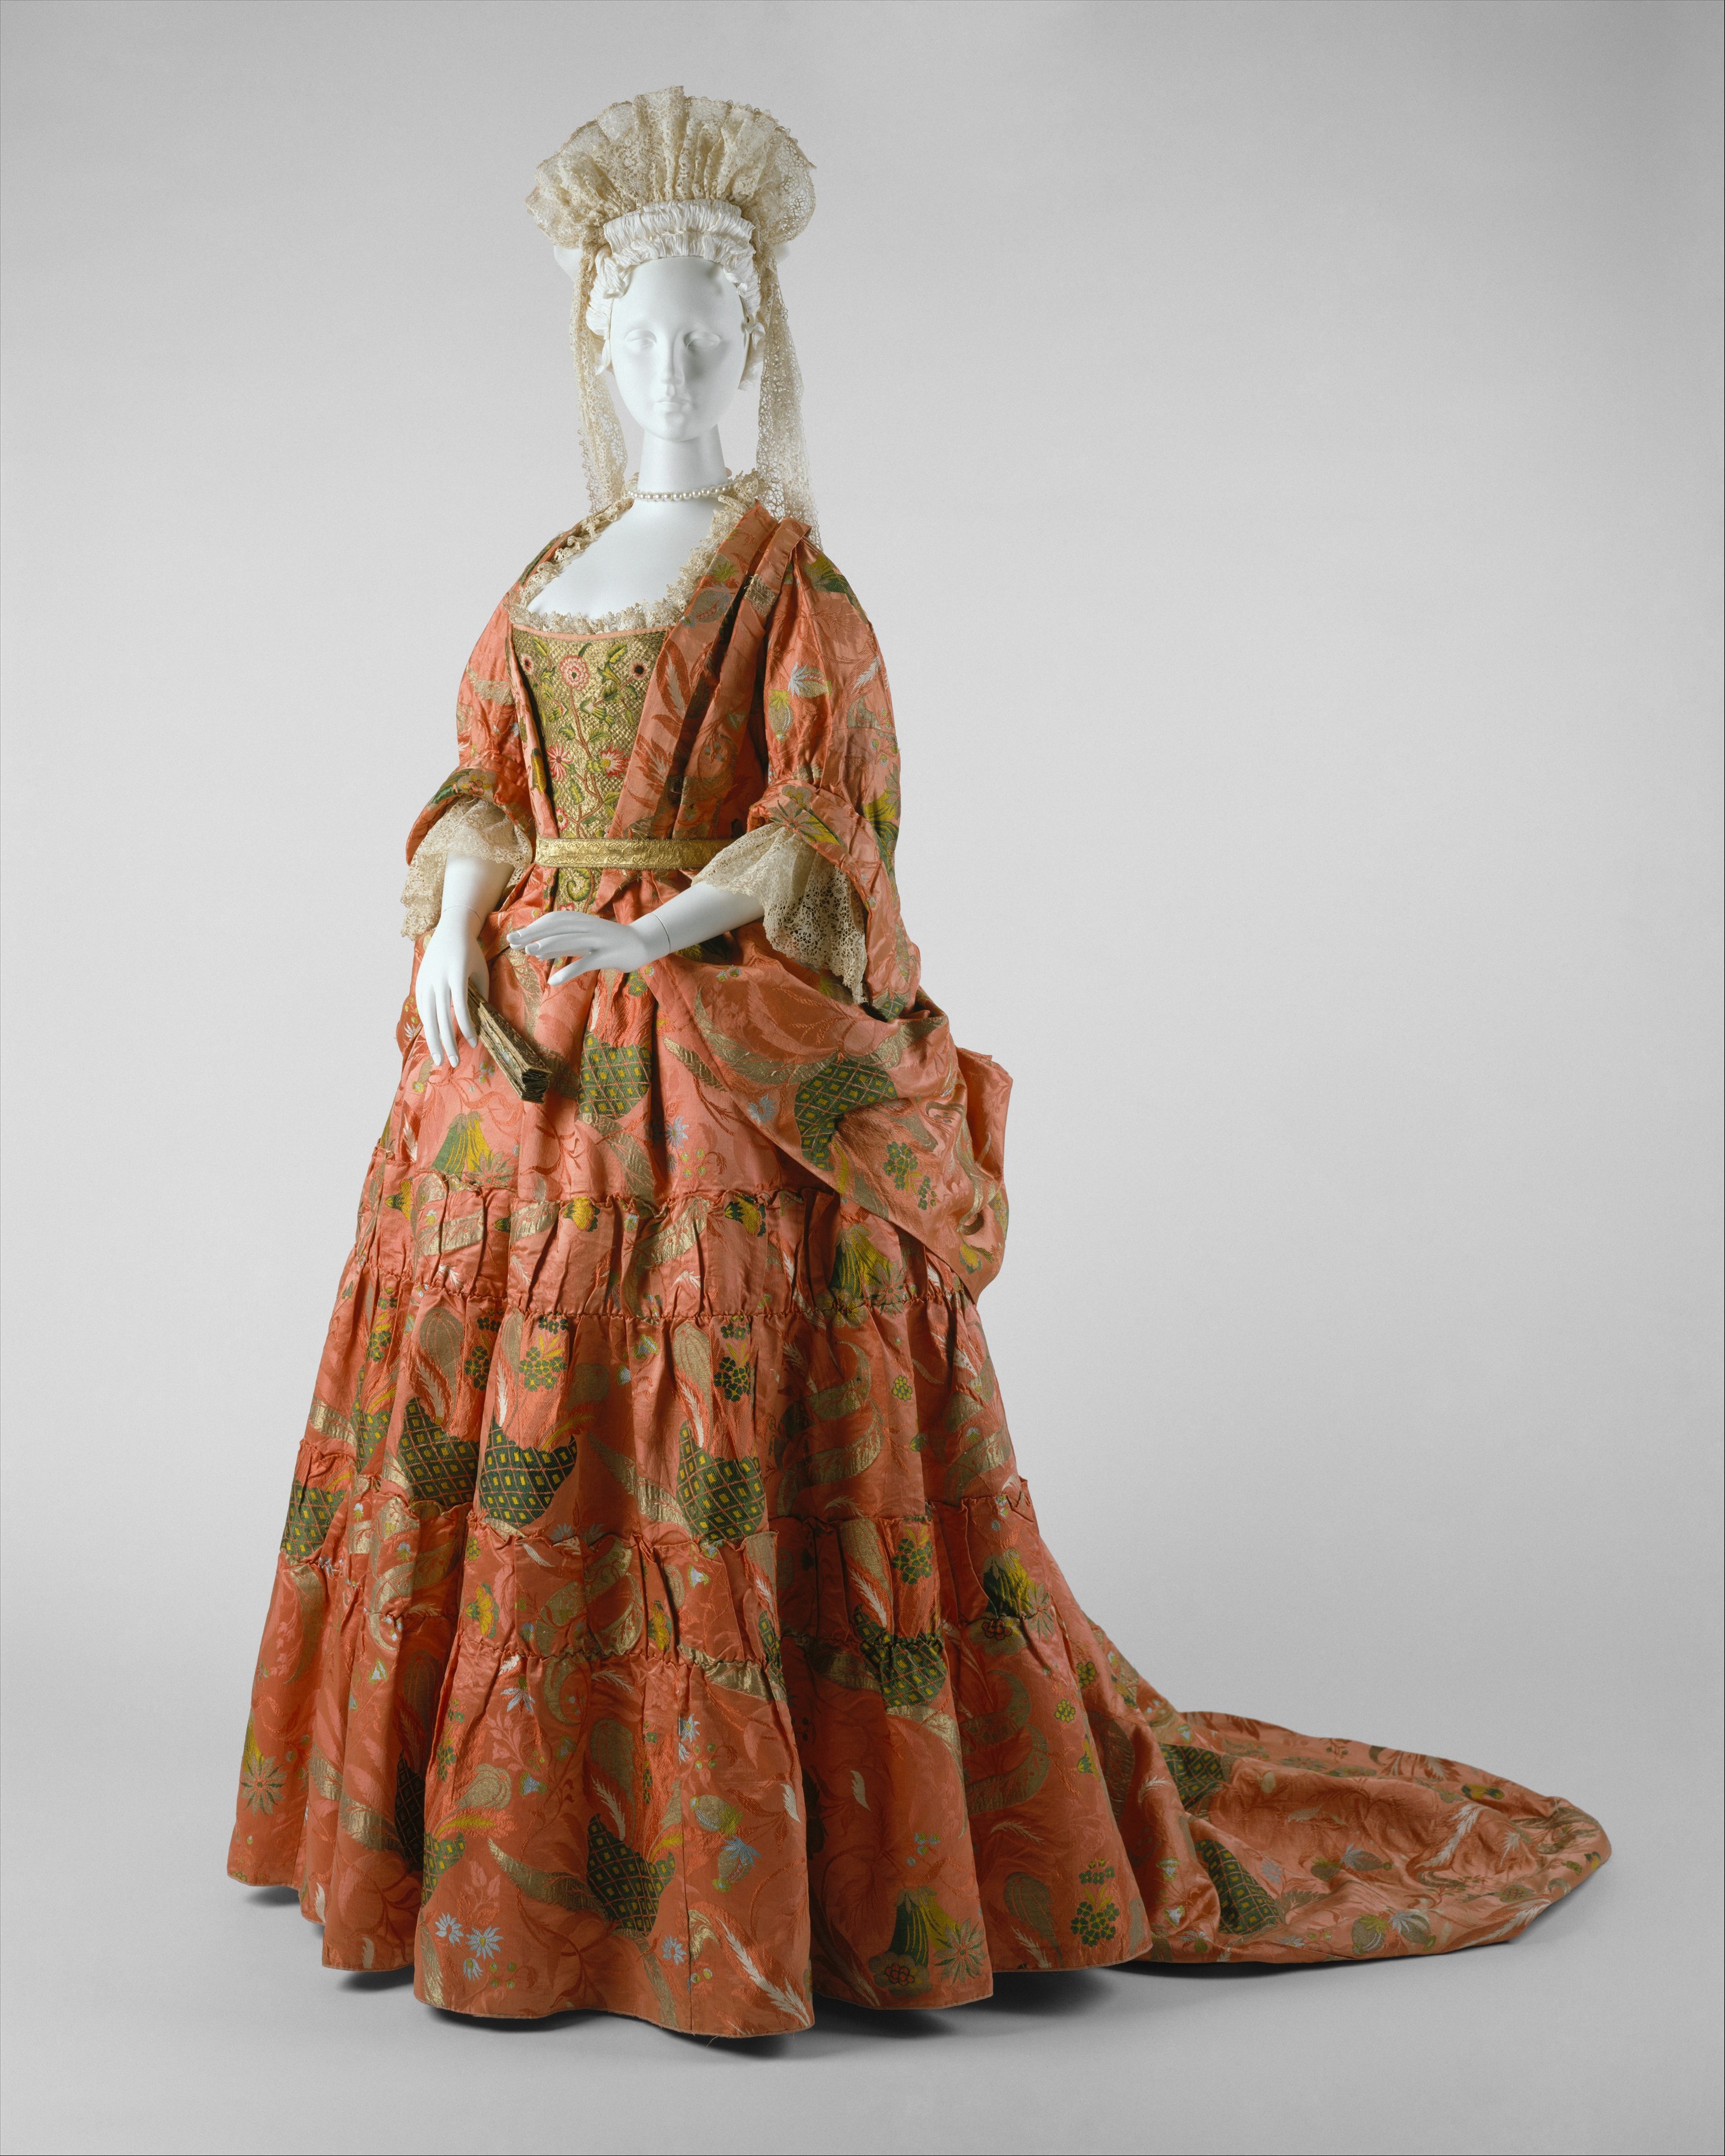 Fashion, clothing in modern-day Italy, the 18th and 19th centuries